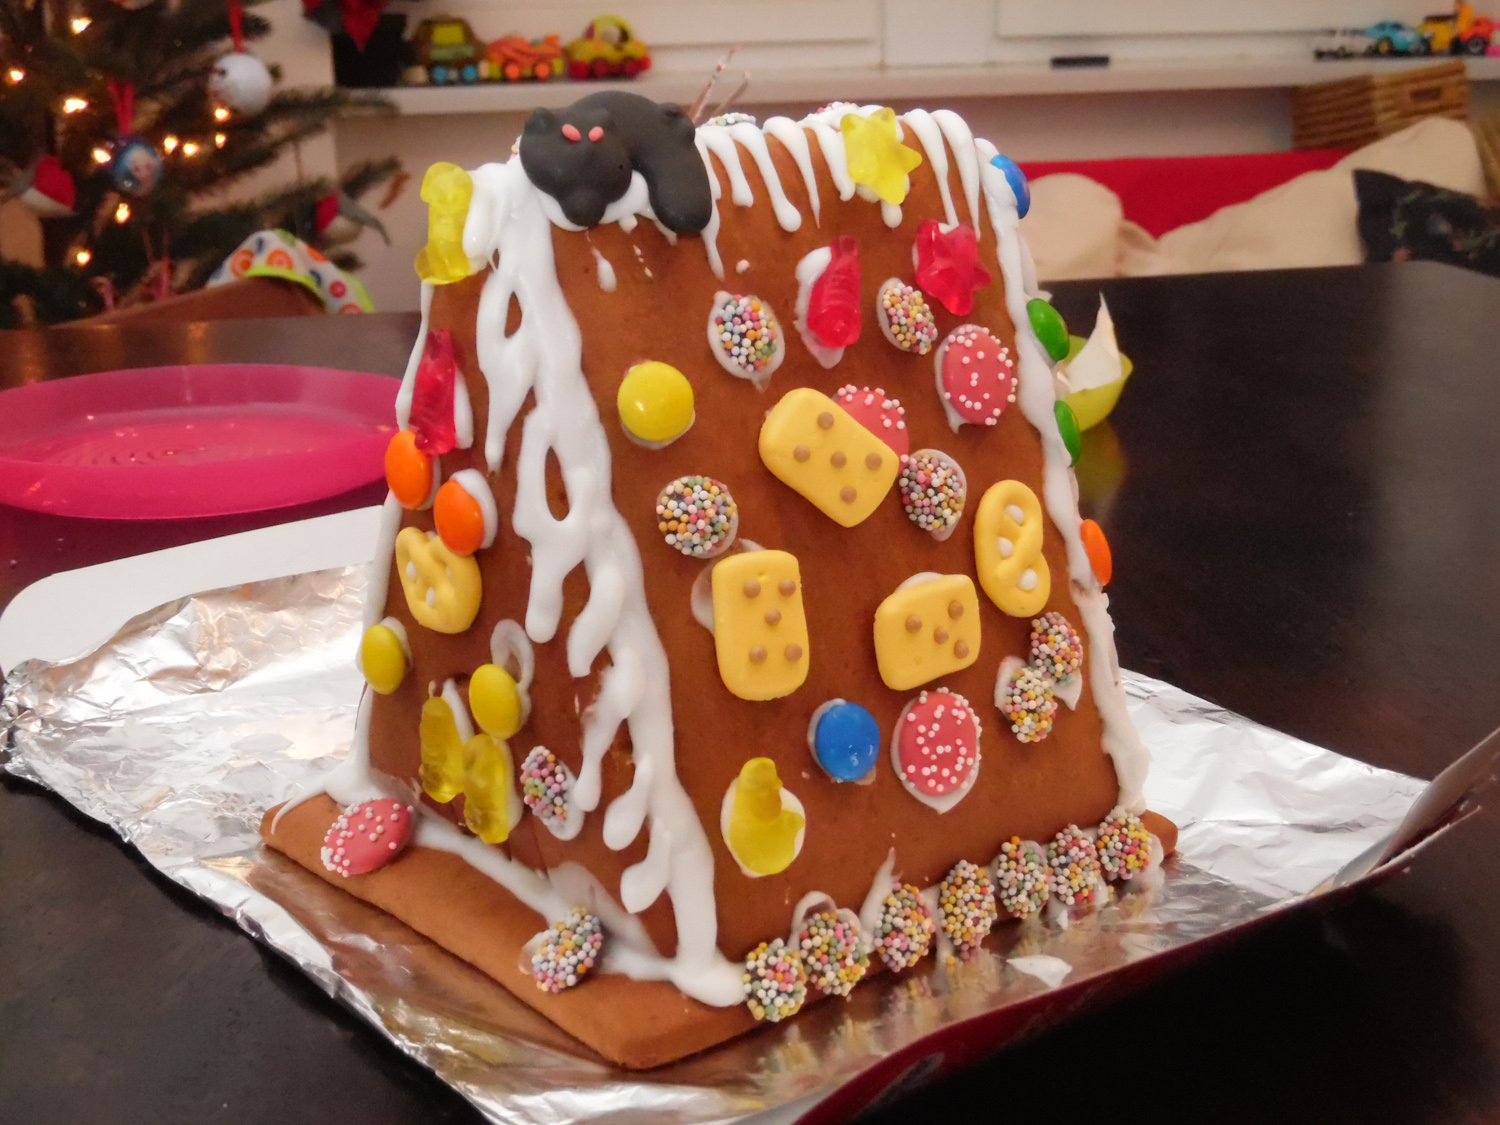 Gingerbread house project with Grandma